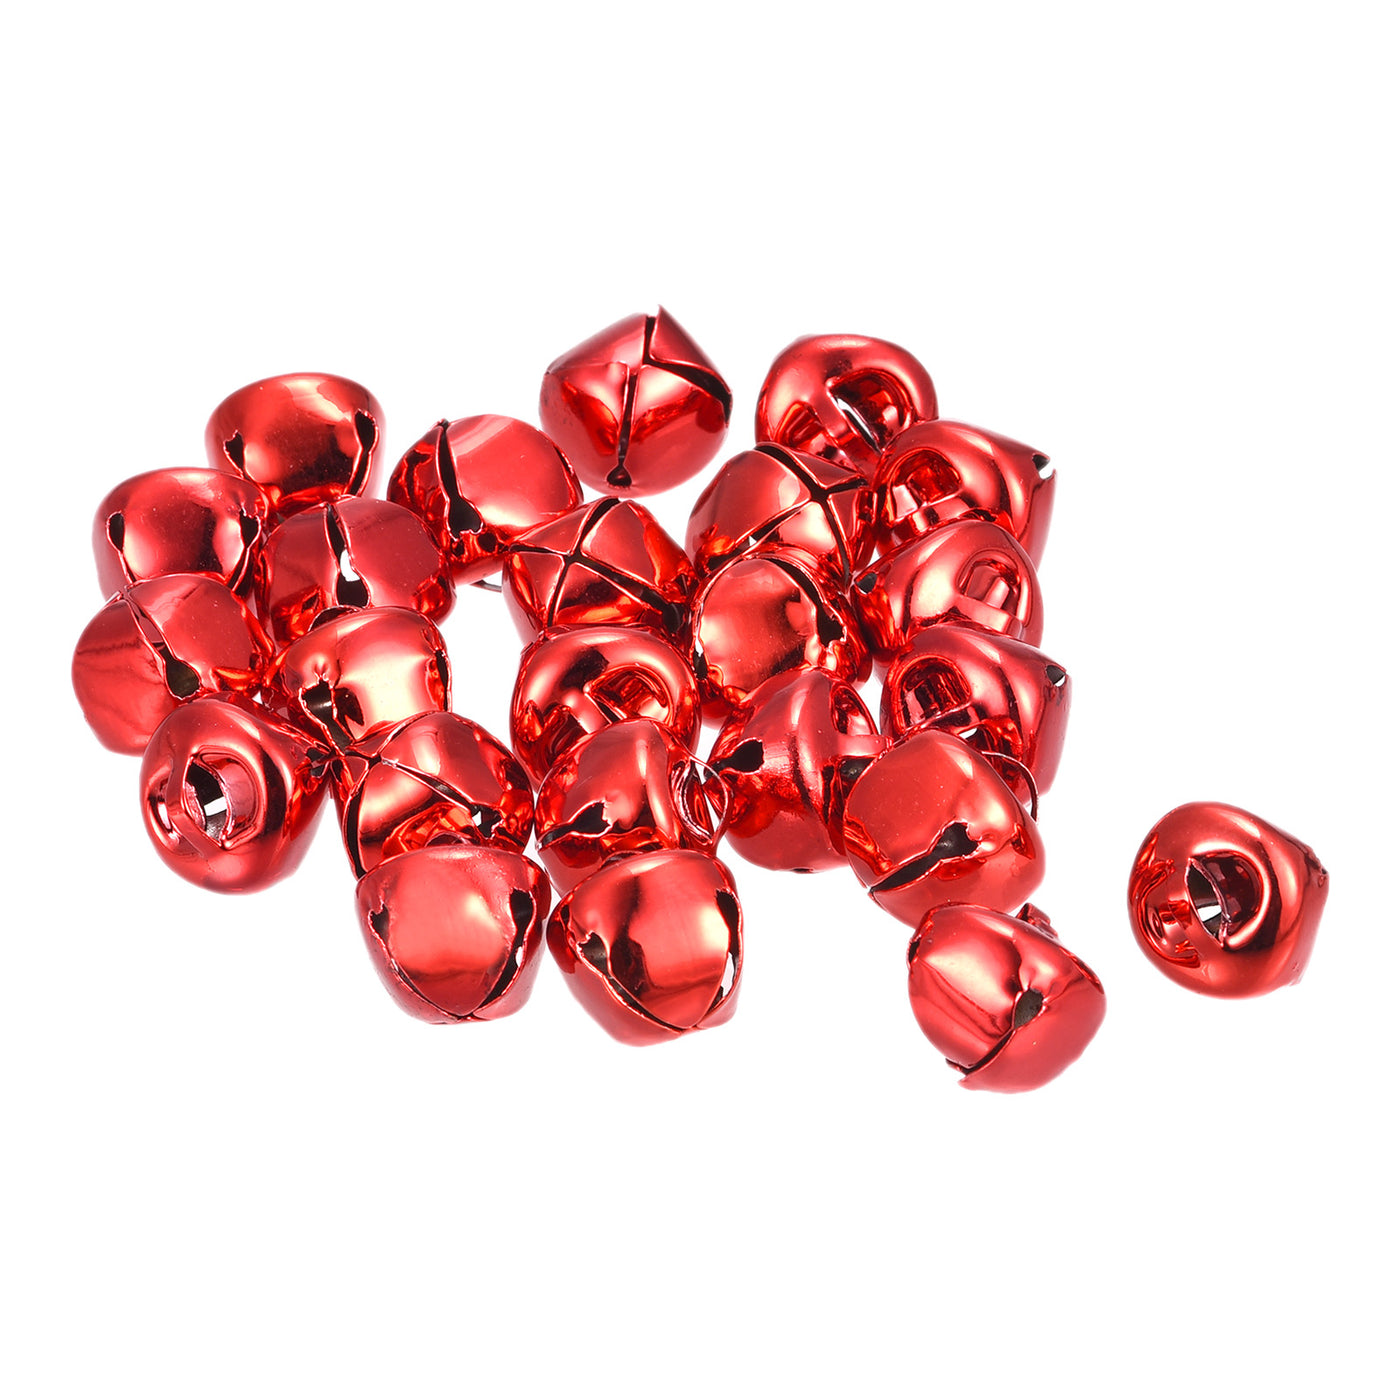 Uxcell Uxcell Jingle Bells, 13mm 80pcs Carbon Steel Craft Bells for DIY Christmas, Red